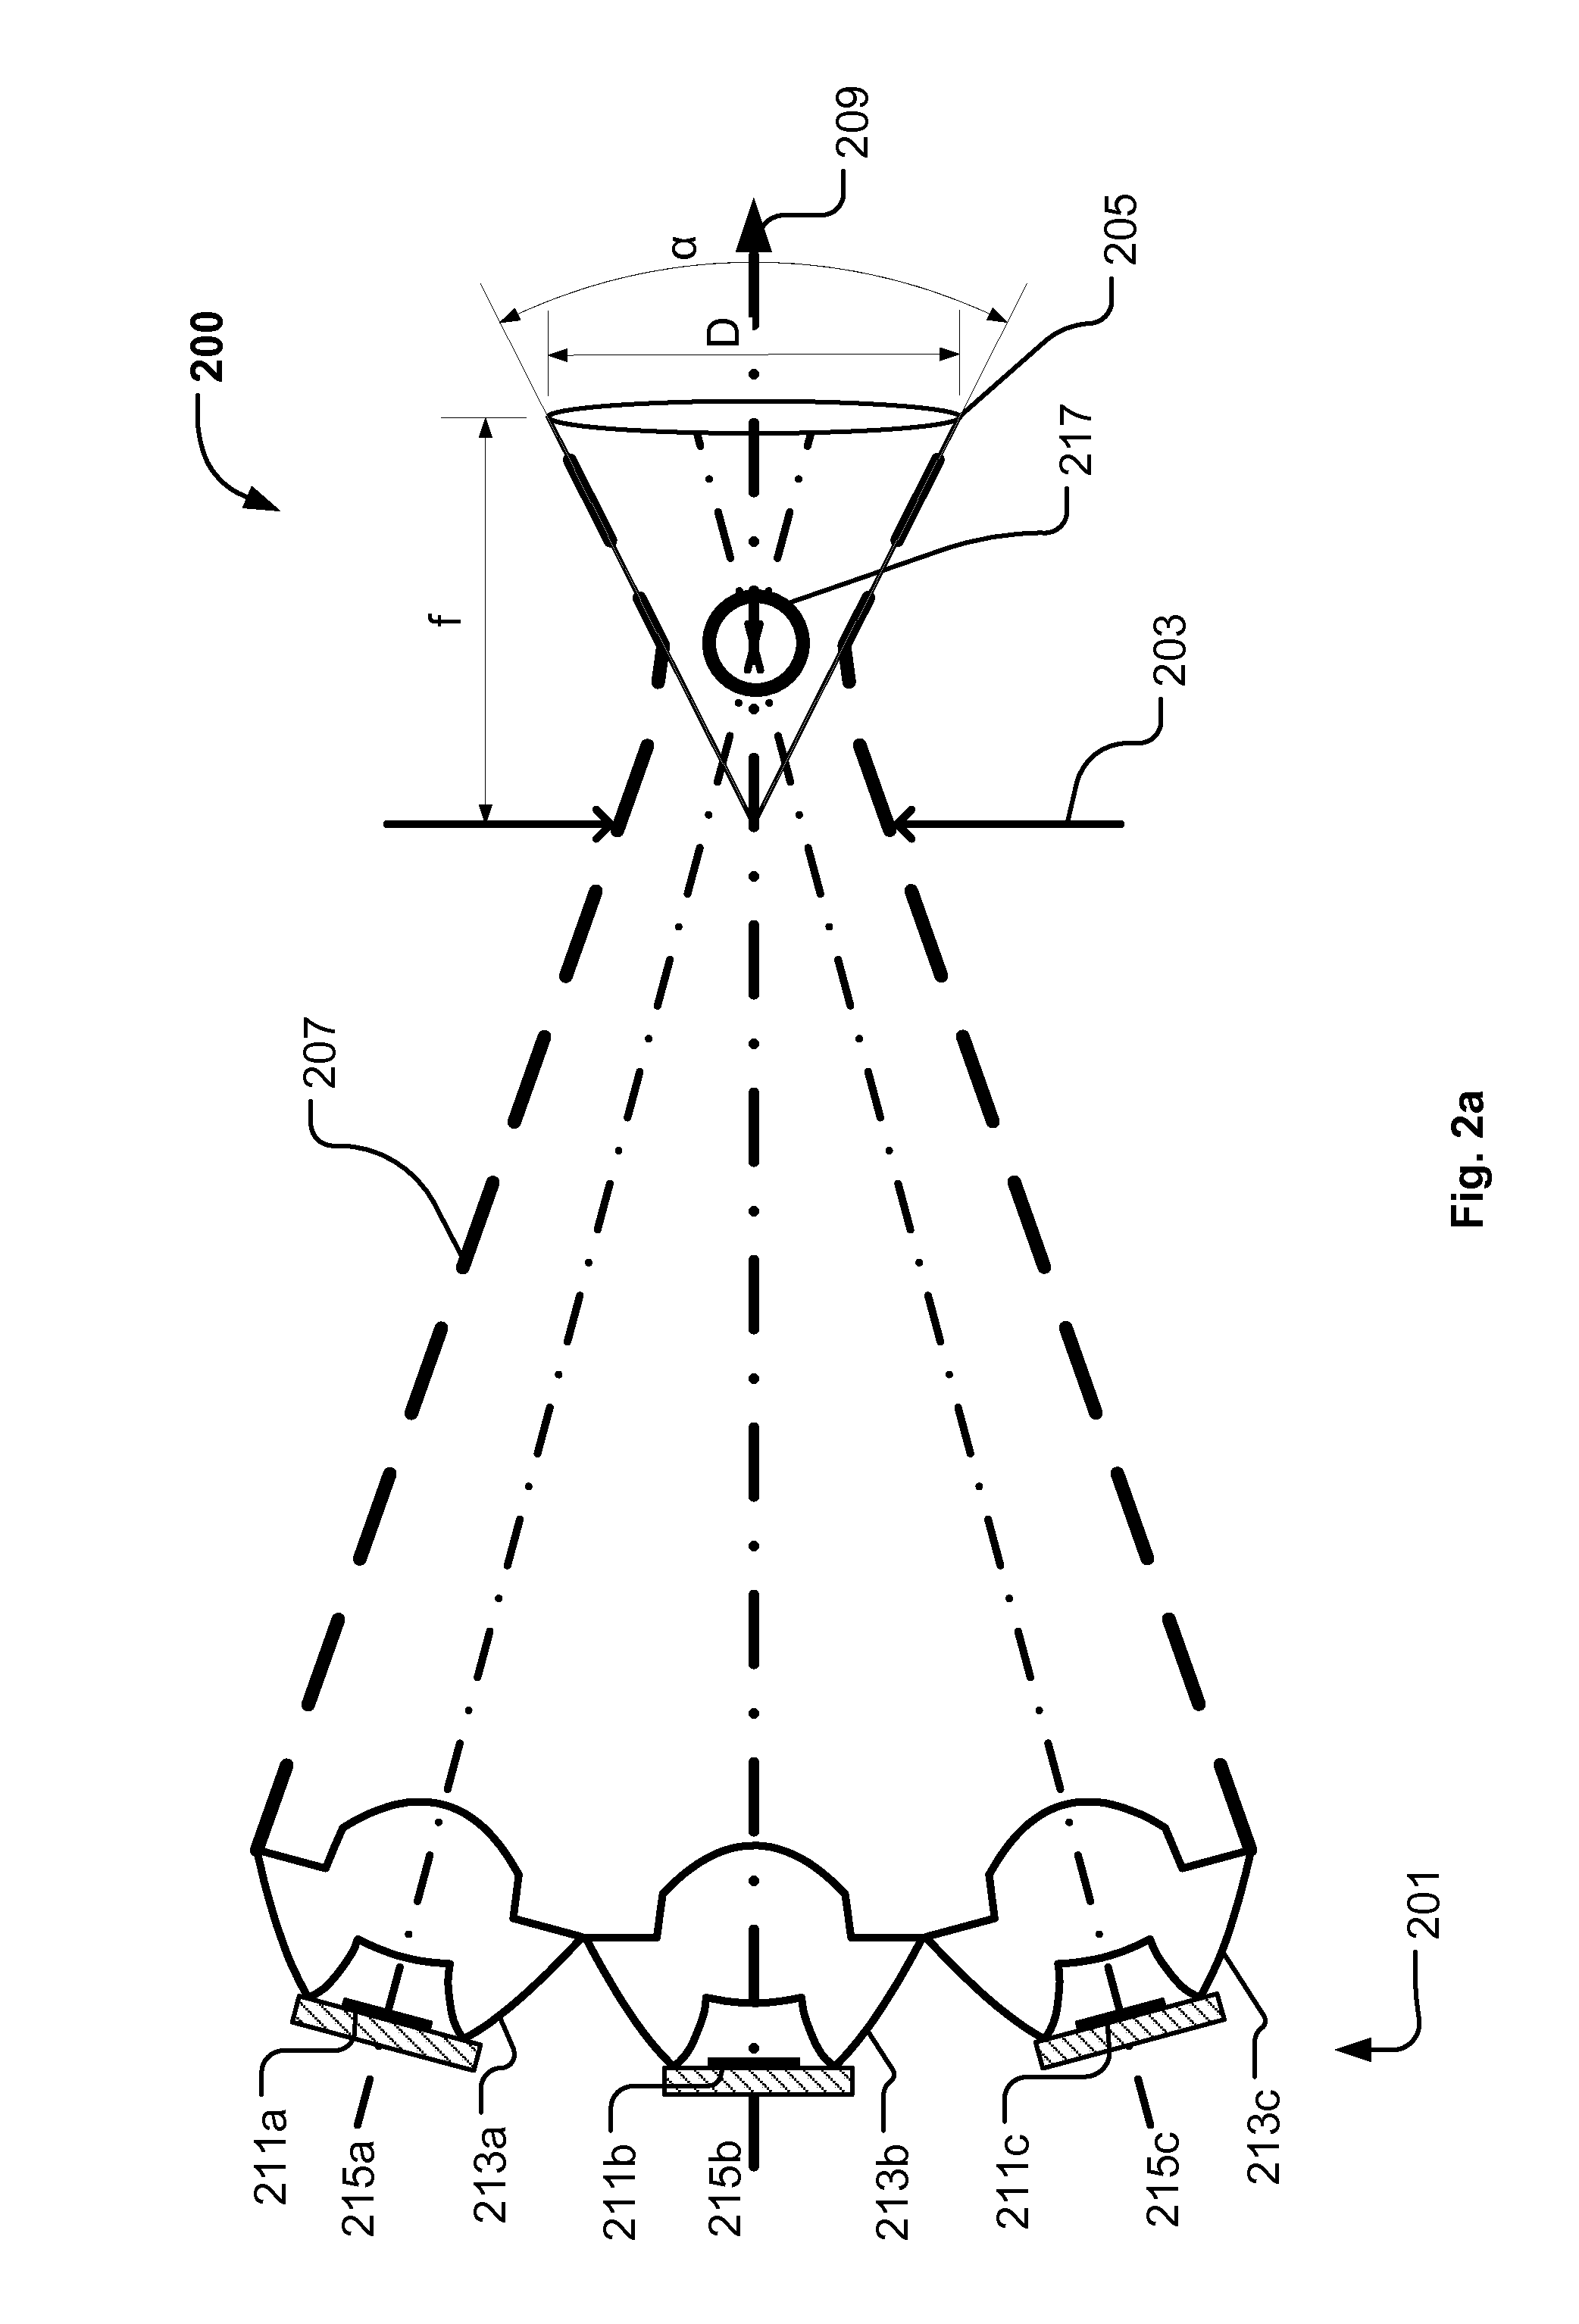 Projecting illumination device with multiple light sources